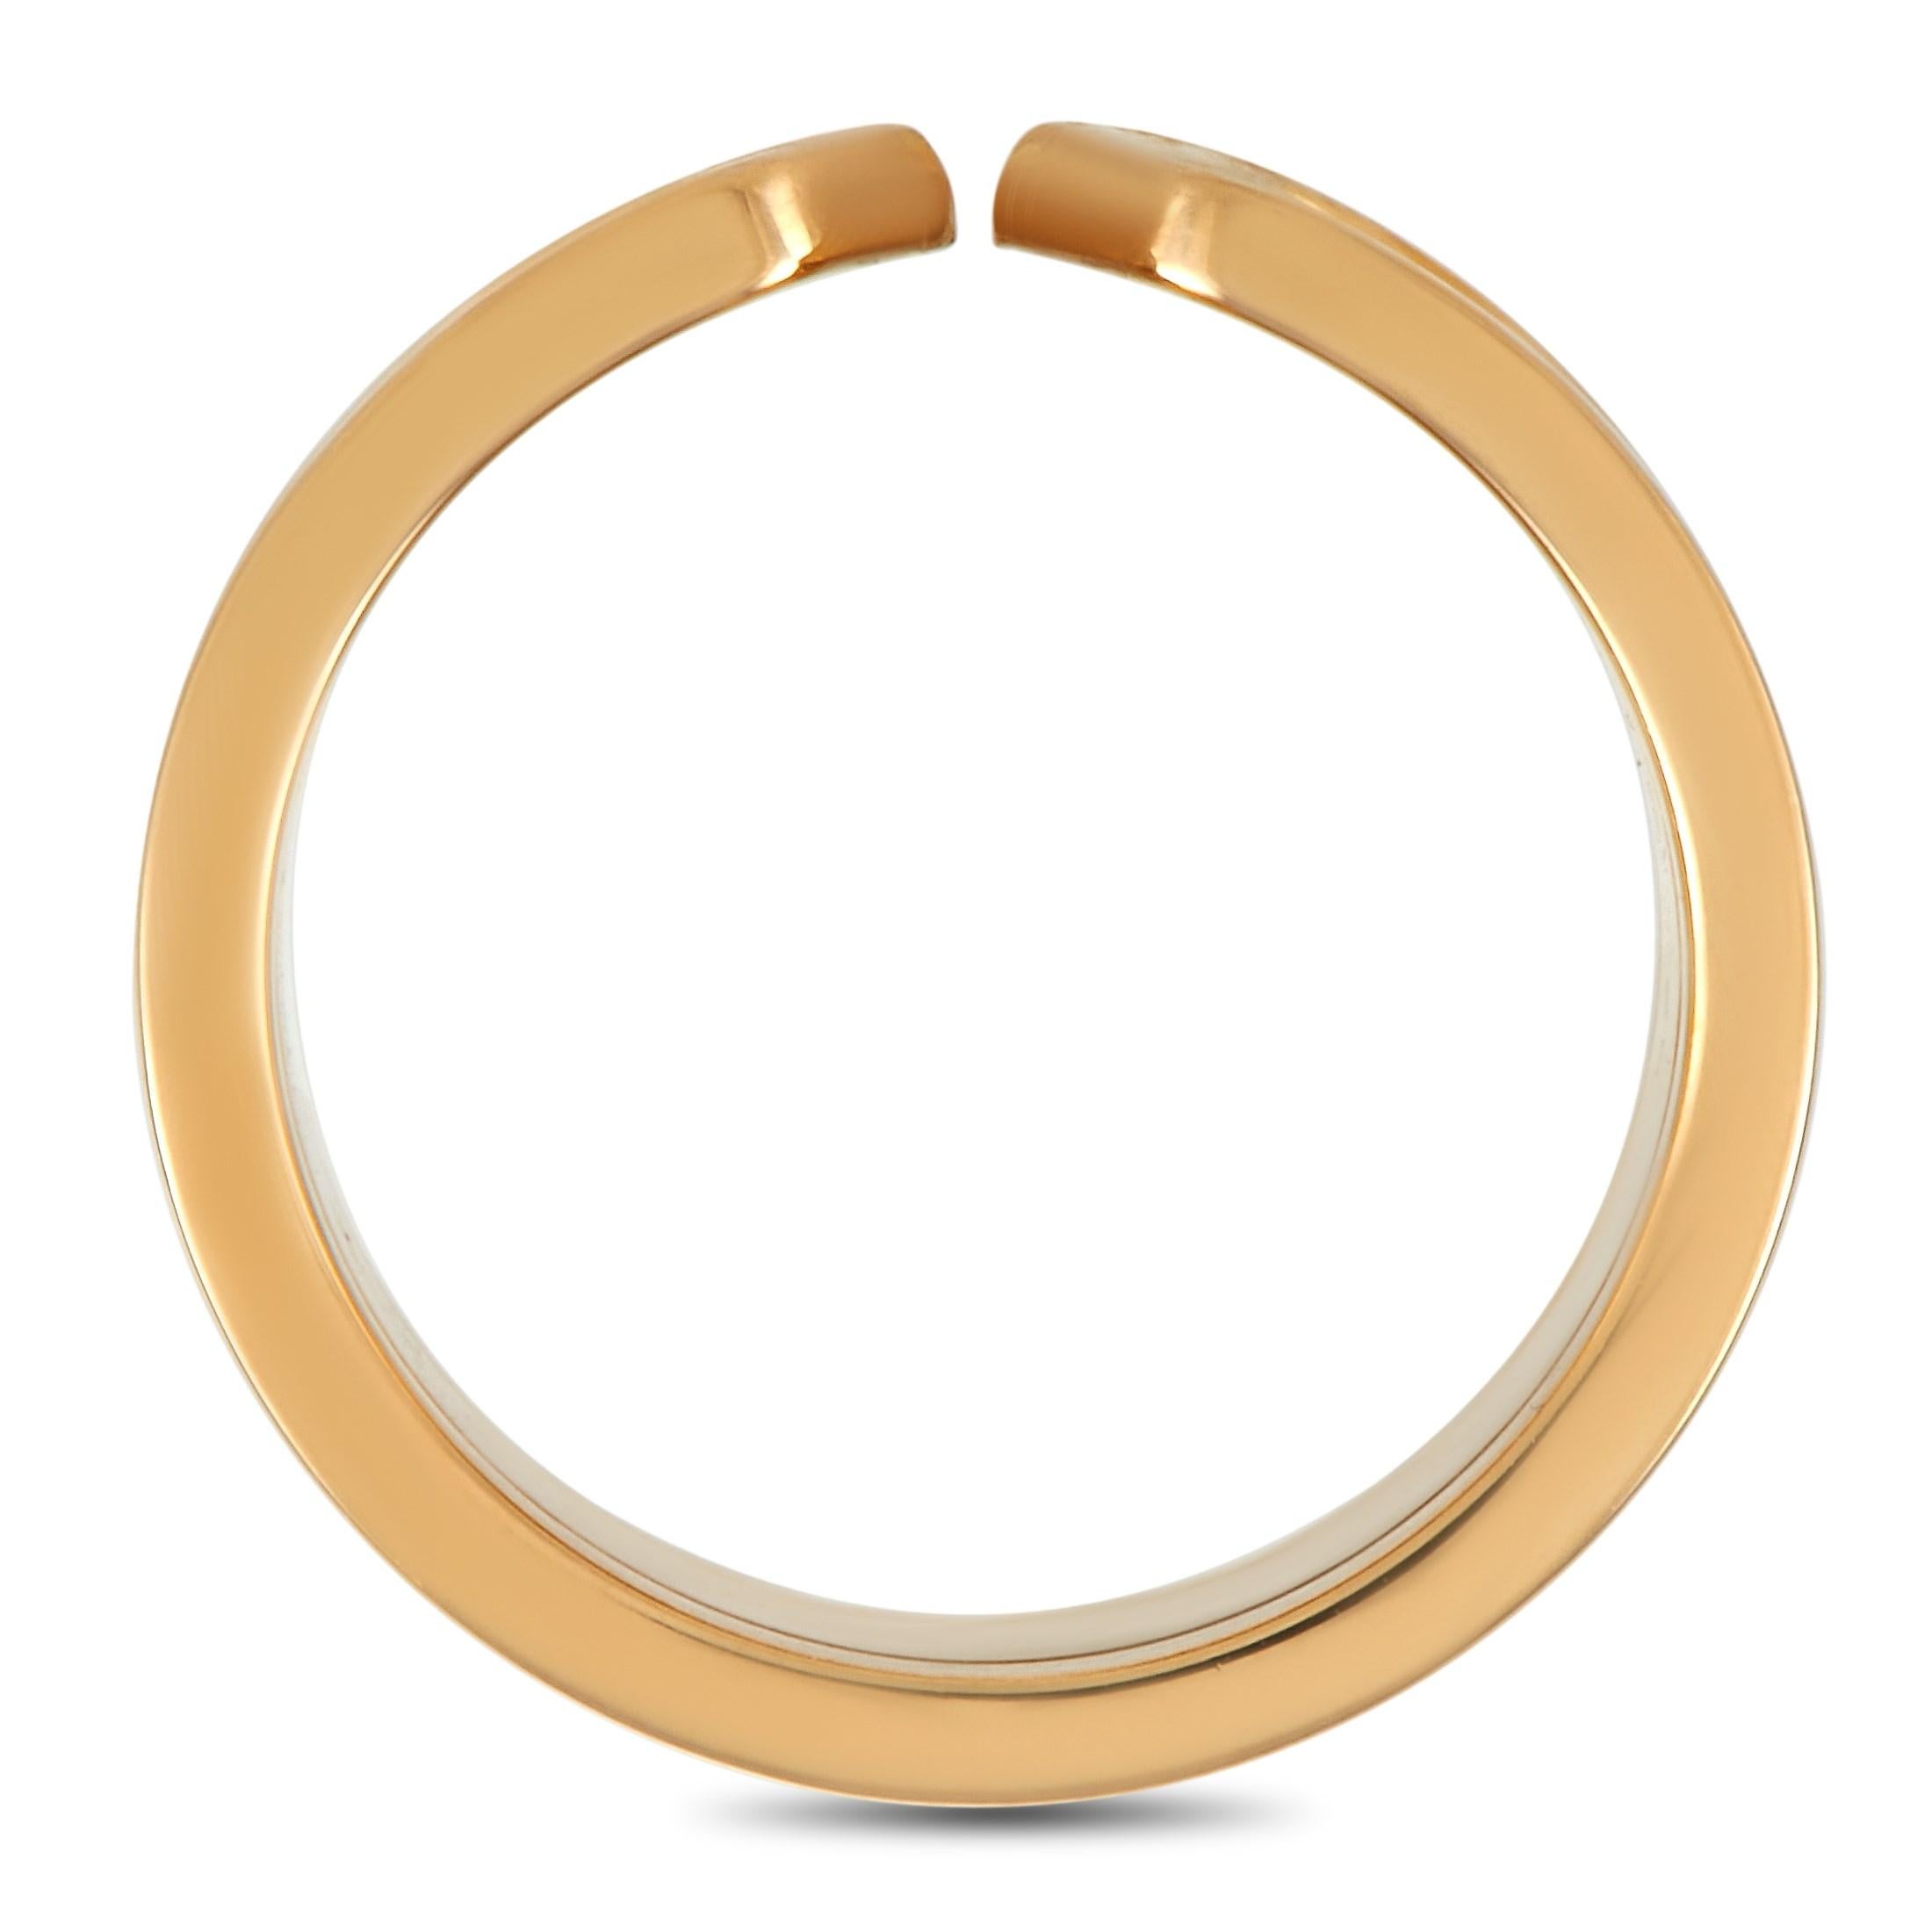 With a simple, sleek, and suave design, this Cartier Double C 18K Yellow Gold Wide Band Ring will lend a stylish edge to any ensemble. The ring features a 10mm wide band crafted in 18K yellow gold. It has an open shank design, a polished bordered